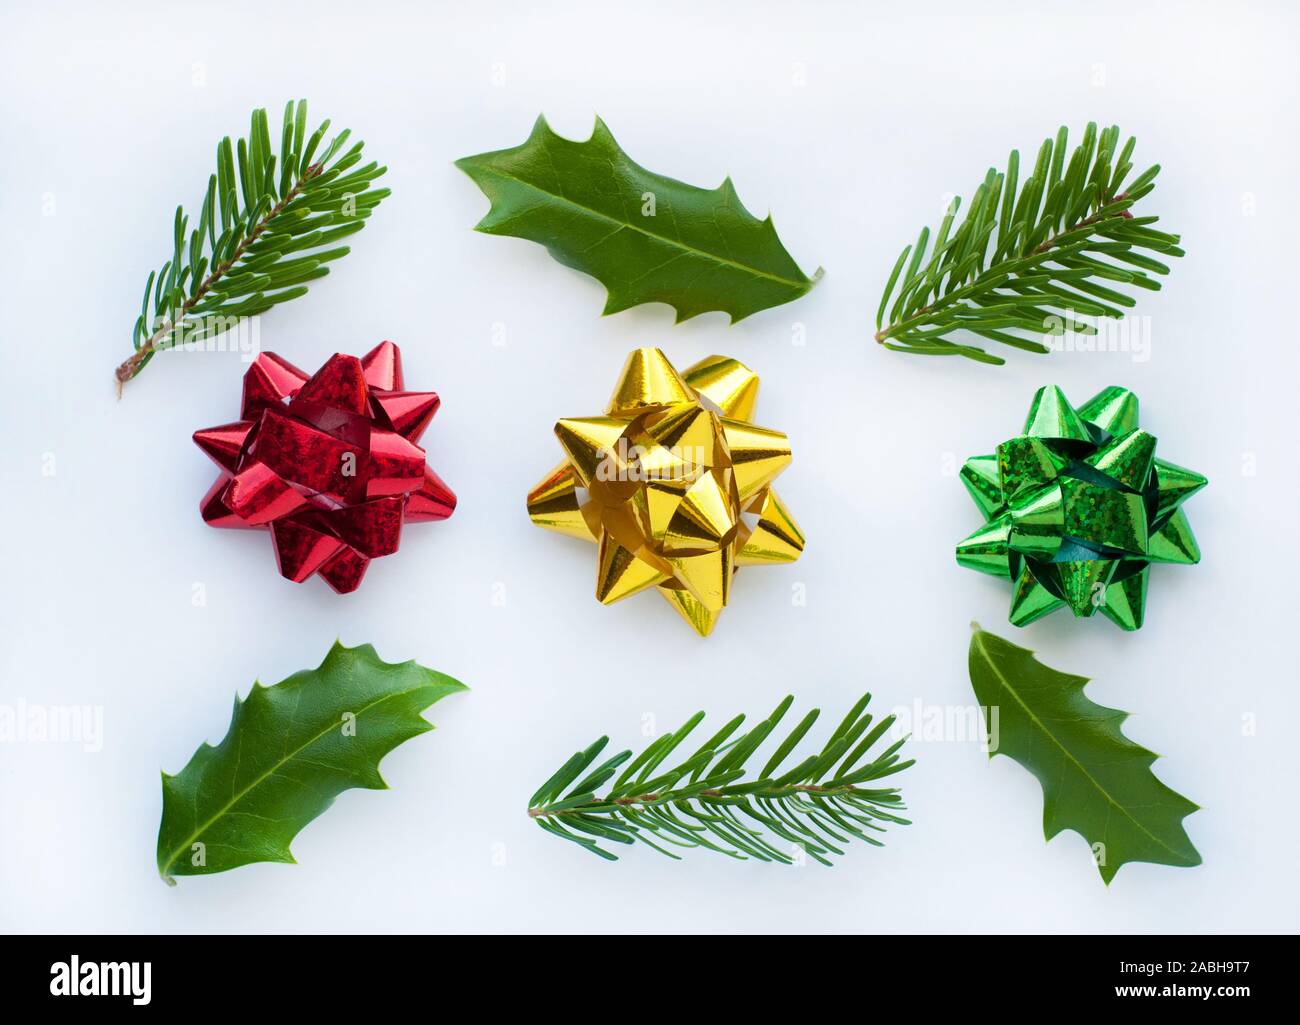 Red, yellow, green gift  bows on a white background. Leaves of Holly and fir branches. Stock Photo